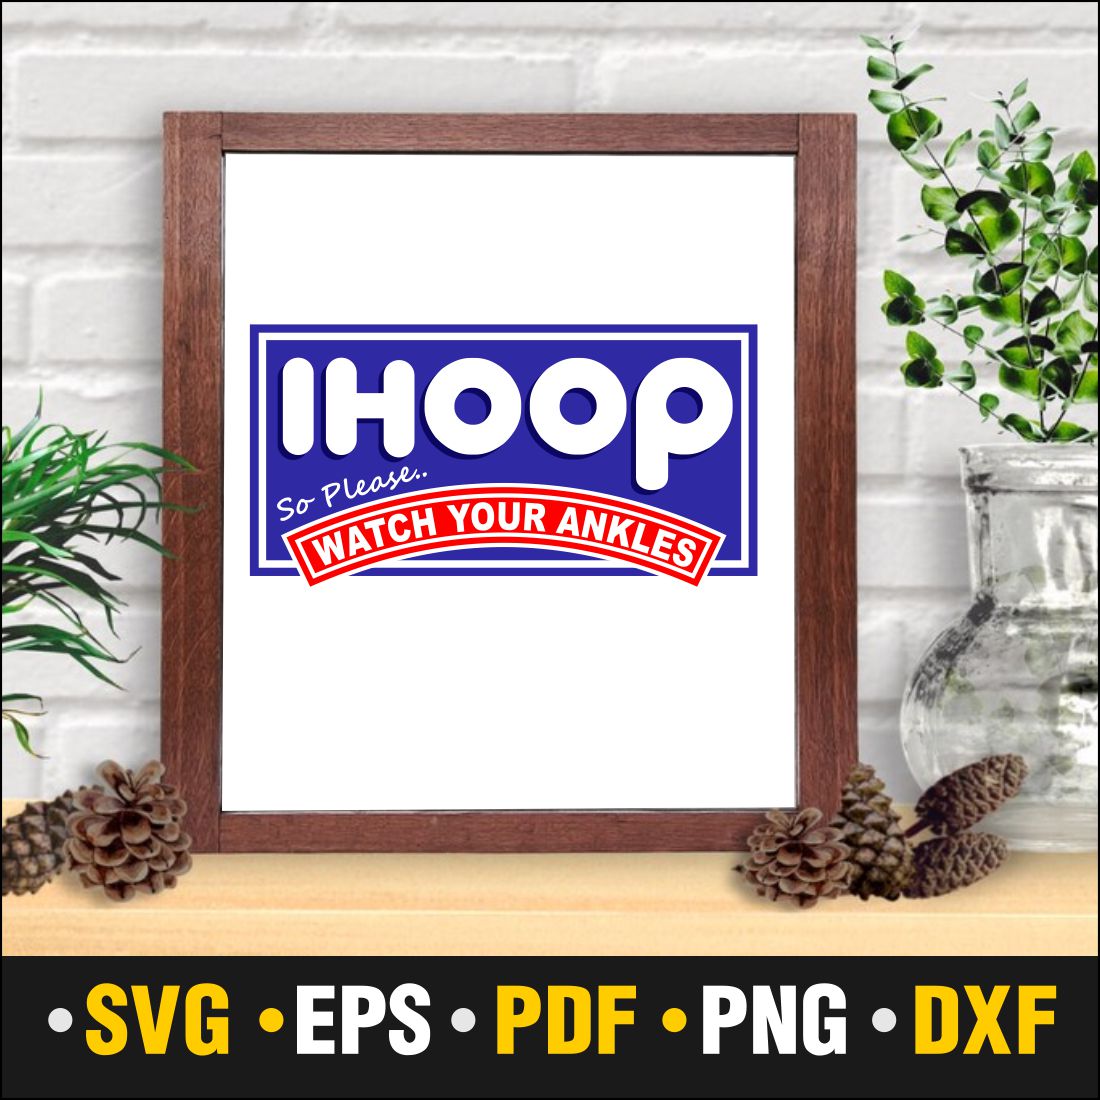 iHoop Svg, iHoops Frame Svg IHOOP so please watch your ankles Vector Cut file Cricut, Silhouette, Pdf Png, Dxf, Decal, Sticker, Stencil, Vinyl preview image.